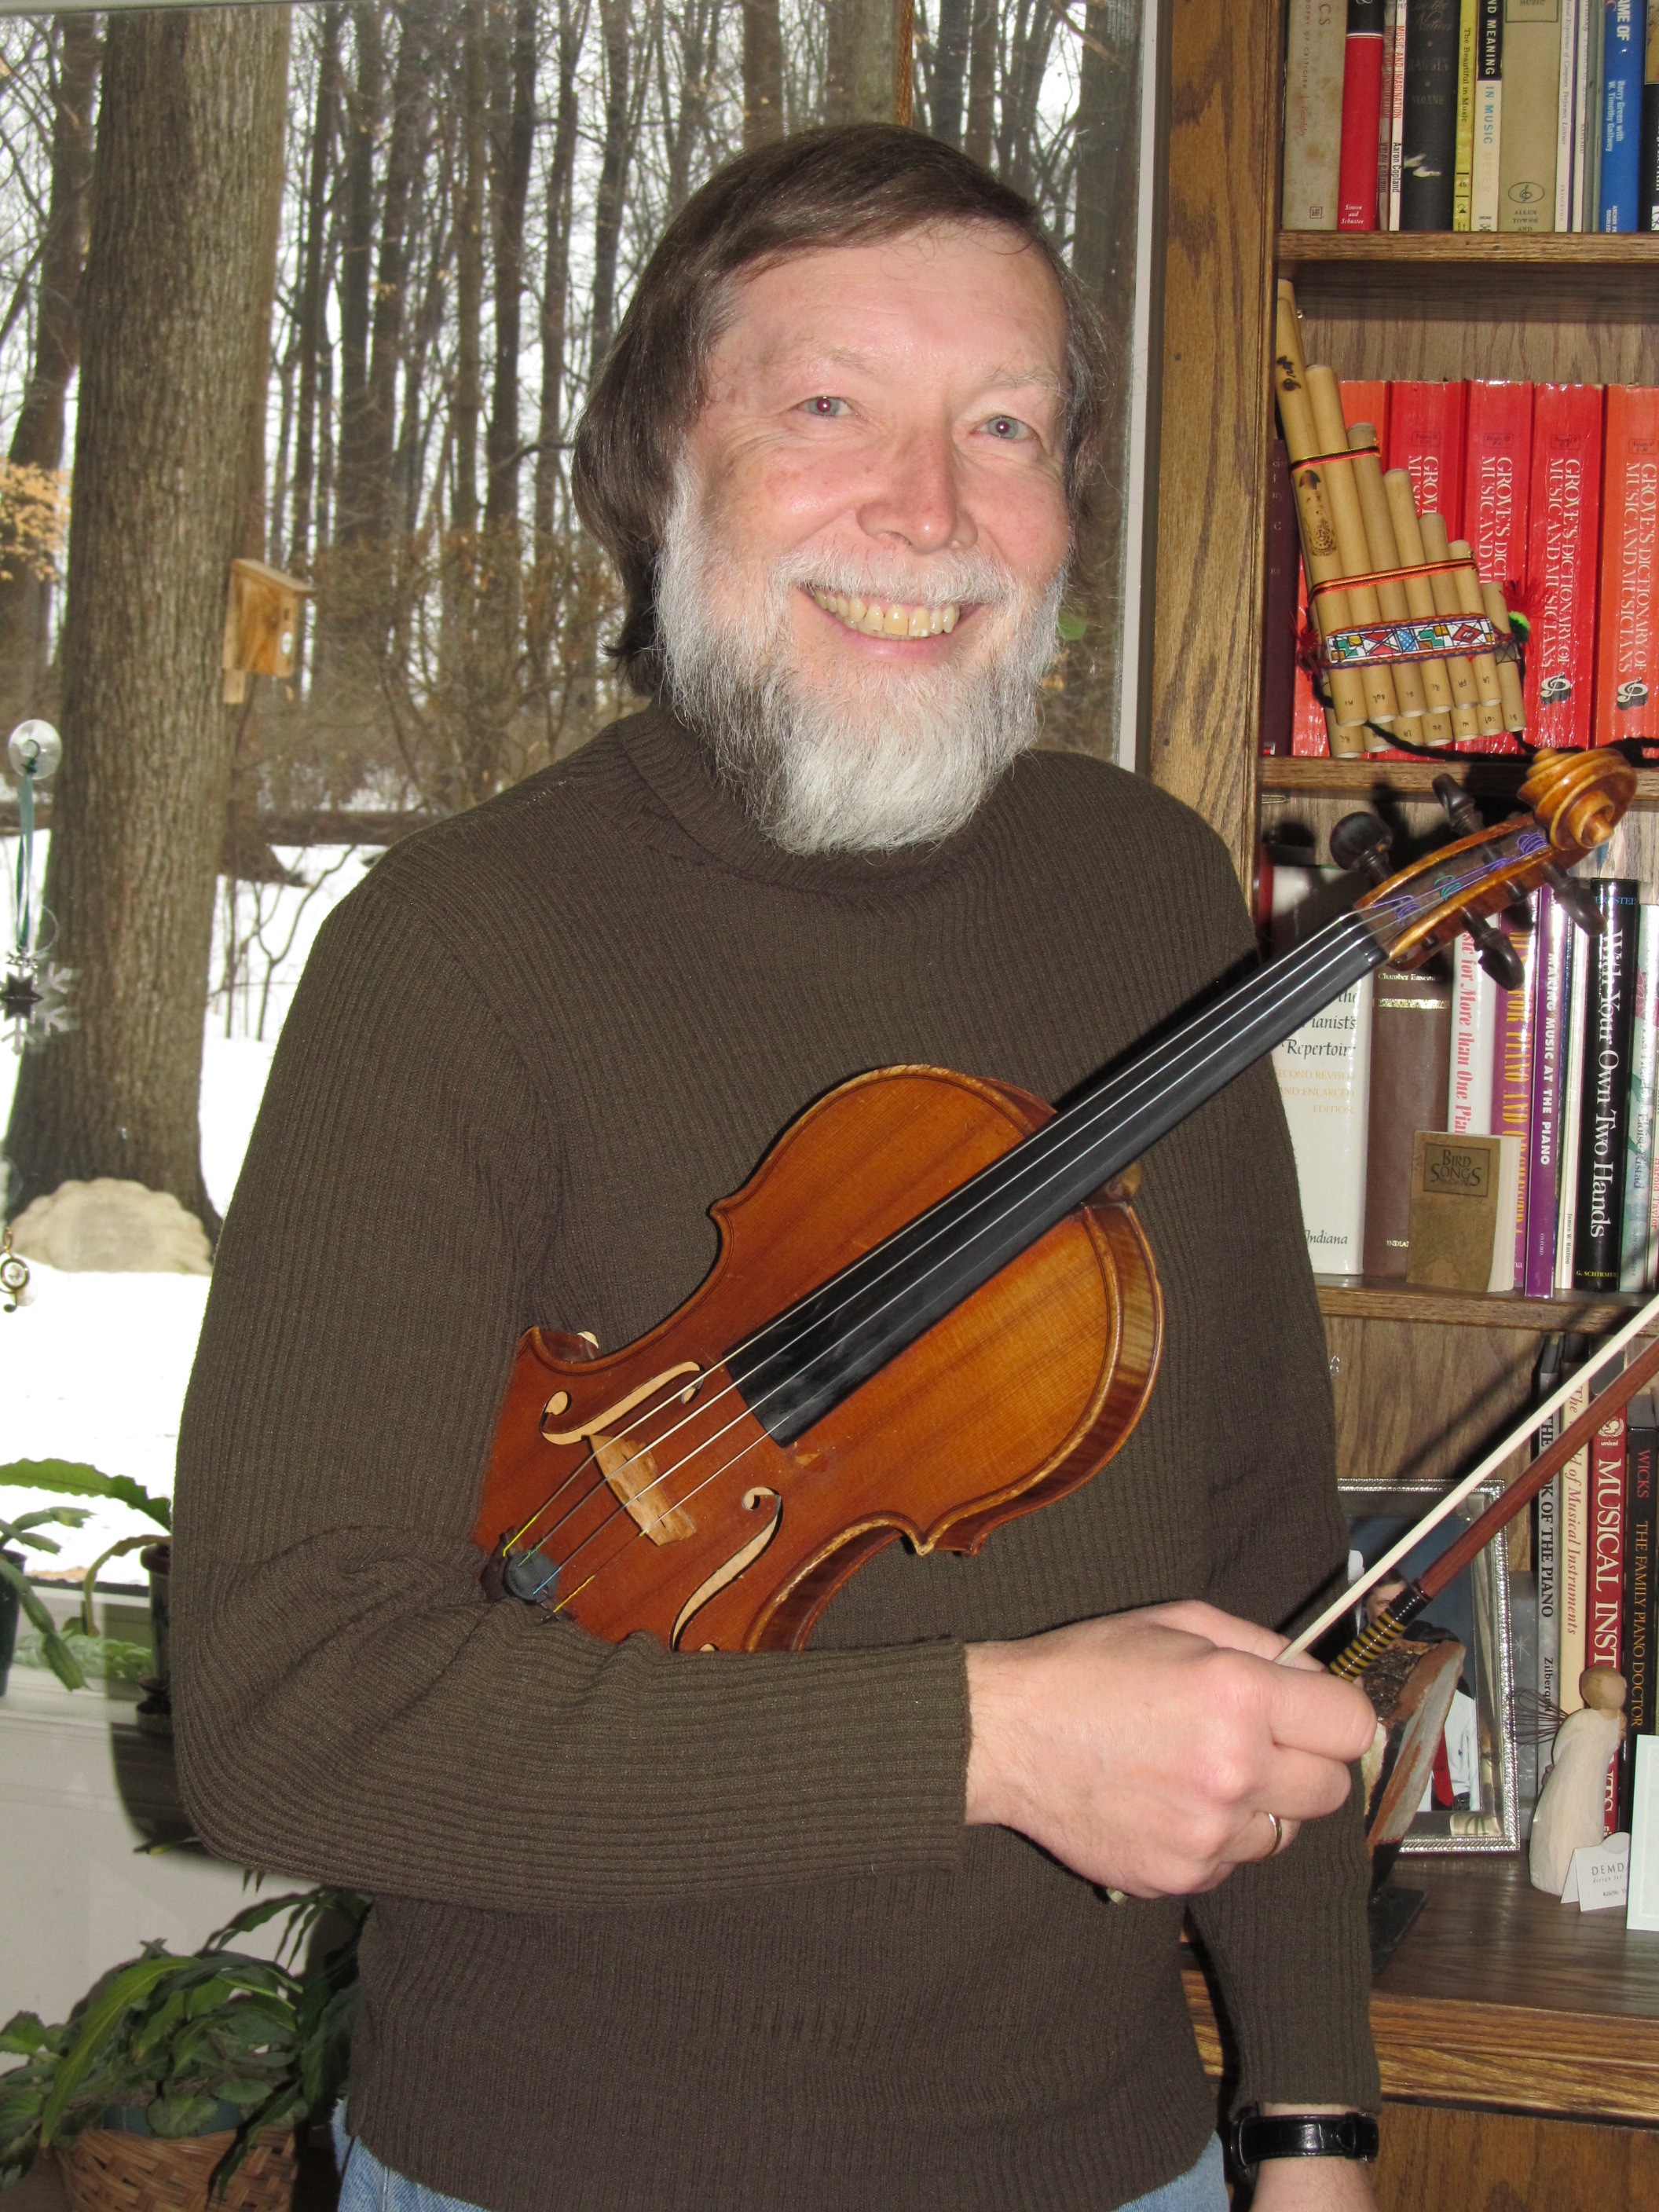 Martin stands with his violin in the studio